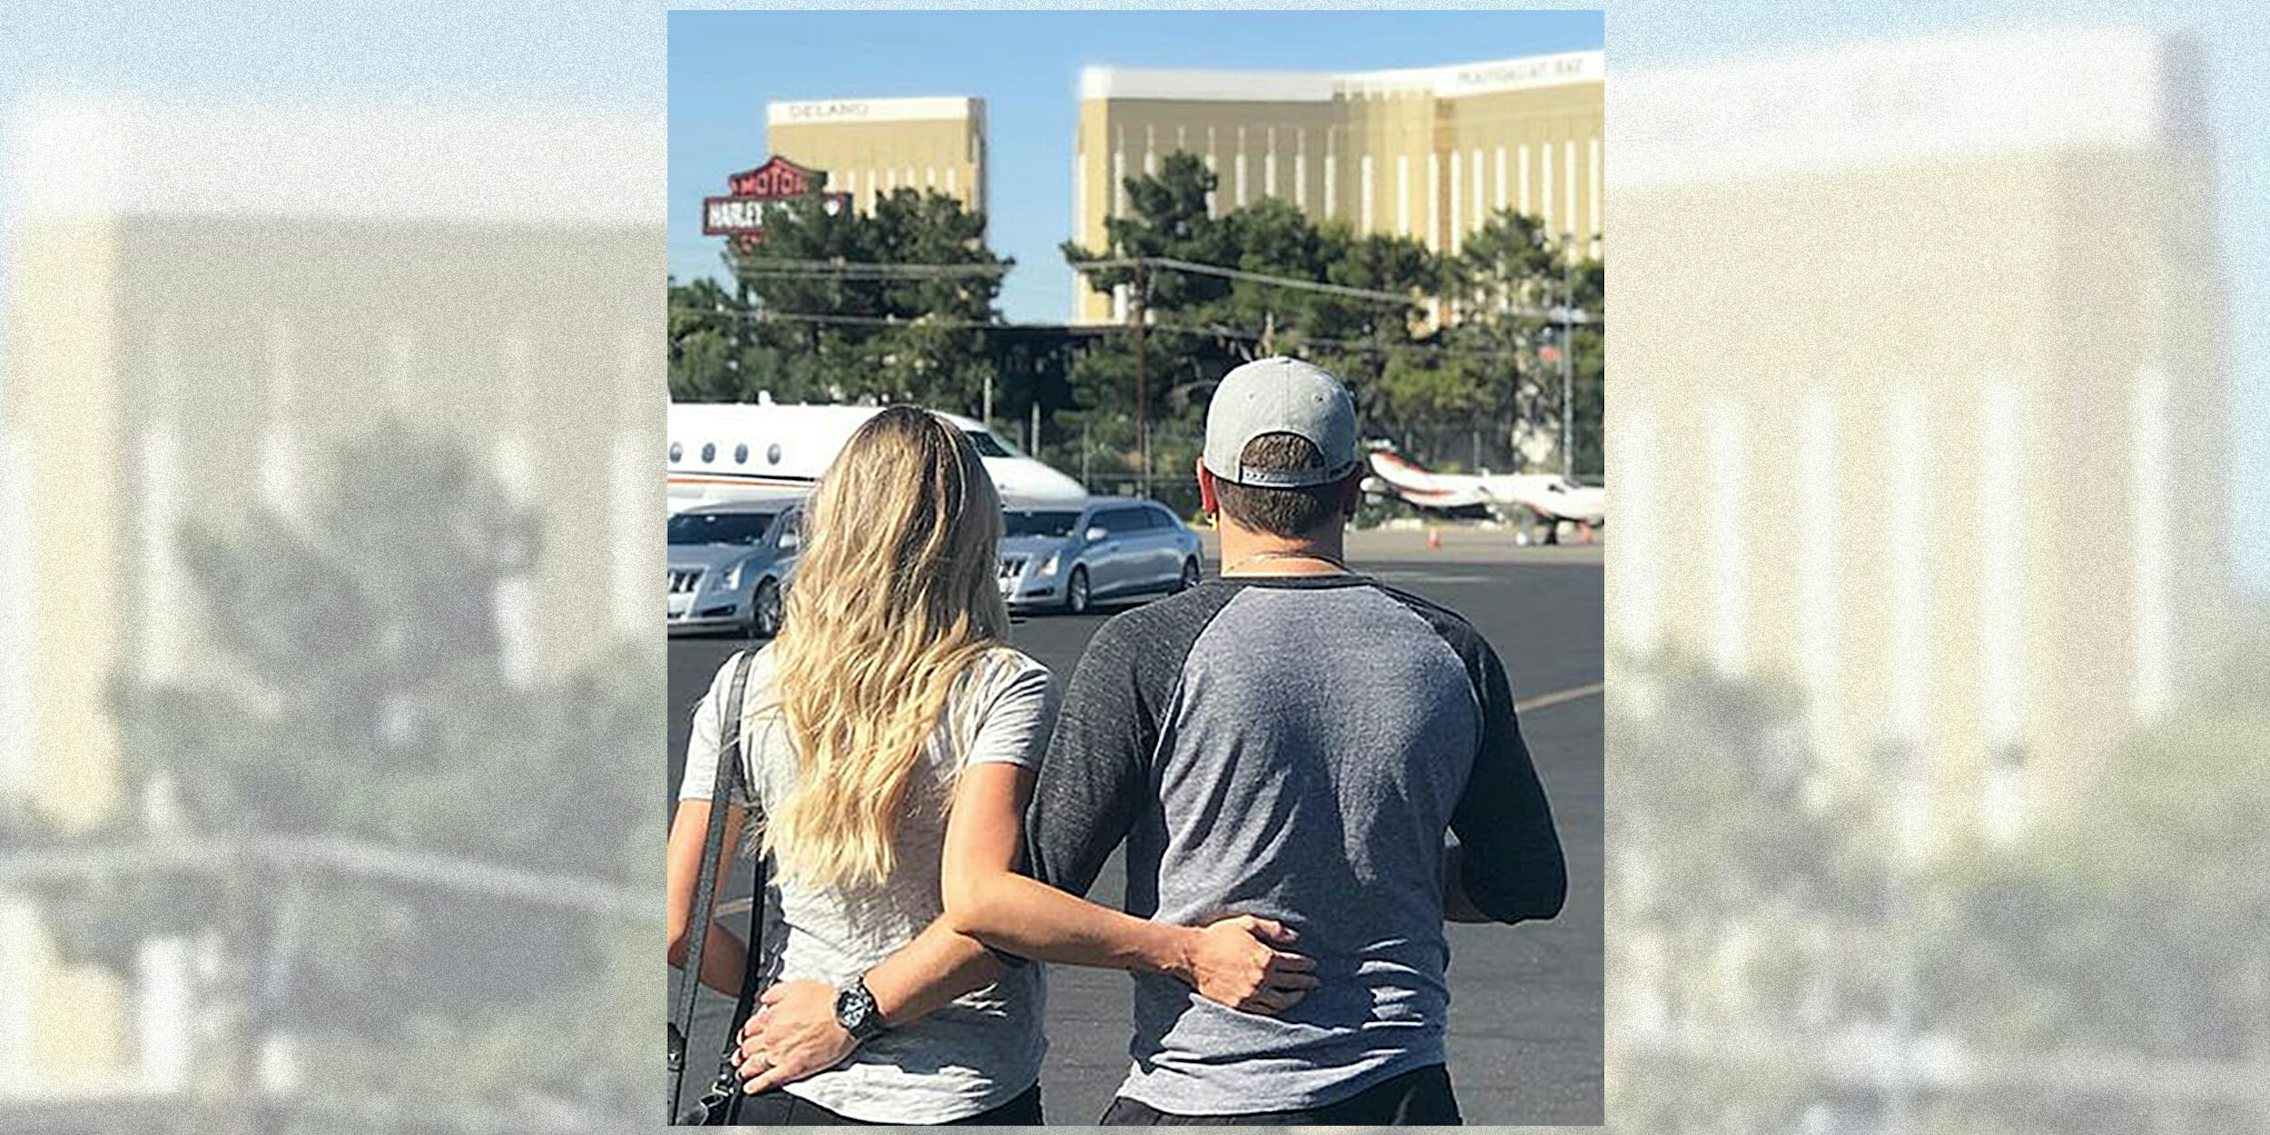 Jason and Brittany Aldean walking together in Las Vegas